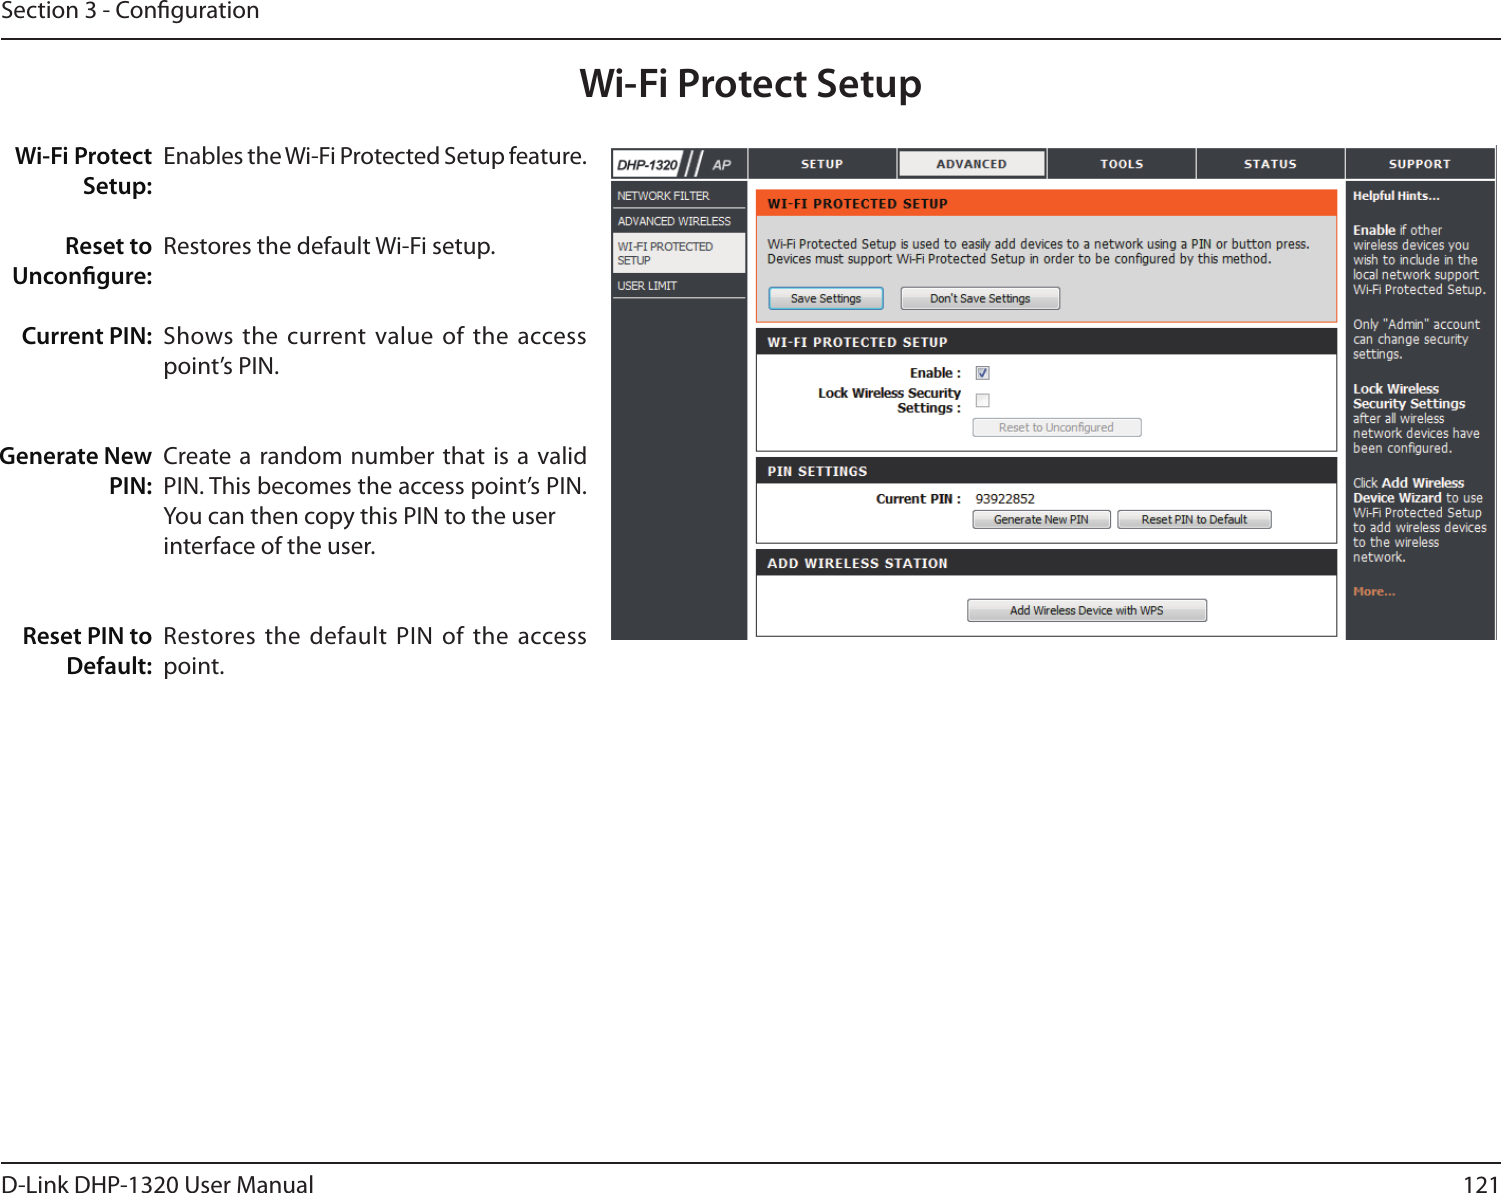 121D-Link DHP-1320 User ManualSection 3 - CongurationWi-Fi Protect Setup:Reset to Uncongure:Current PIN:Generate NewPIN:Reset PIN to Default:Enables the Wi-Fi Protected Setup feature.Restores the default Wi-Fi setup.Shows the current value of the access point’s PIN.Create a random number that is a valid PIN. This becomes the access point’s PIN. You can then copy this PIN to the userinterface of the user.Restores the default  PIN  of  the  access point.Wi-Fi Protect Setup